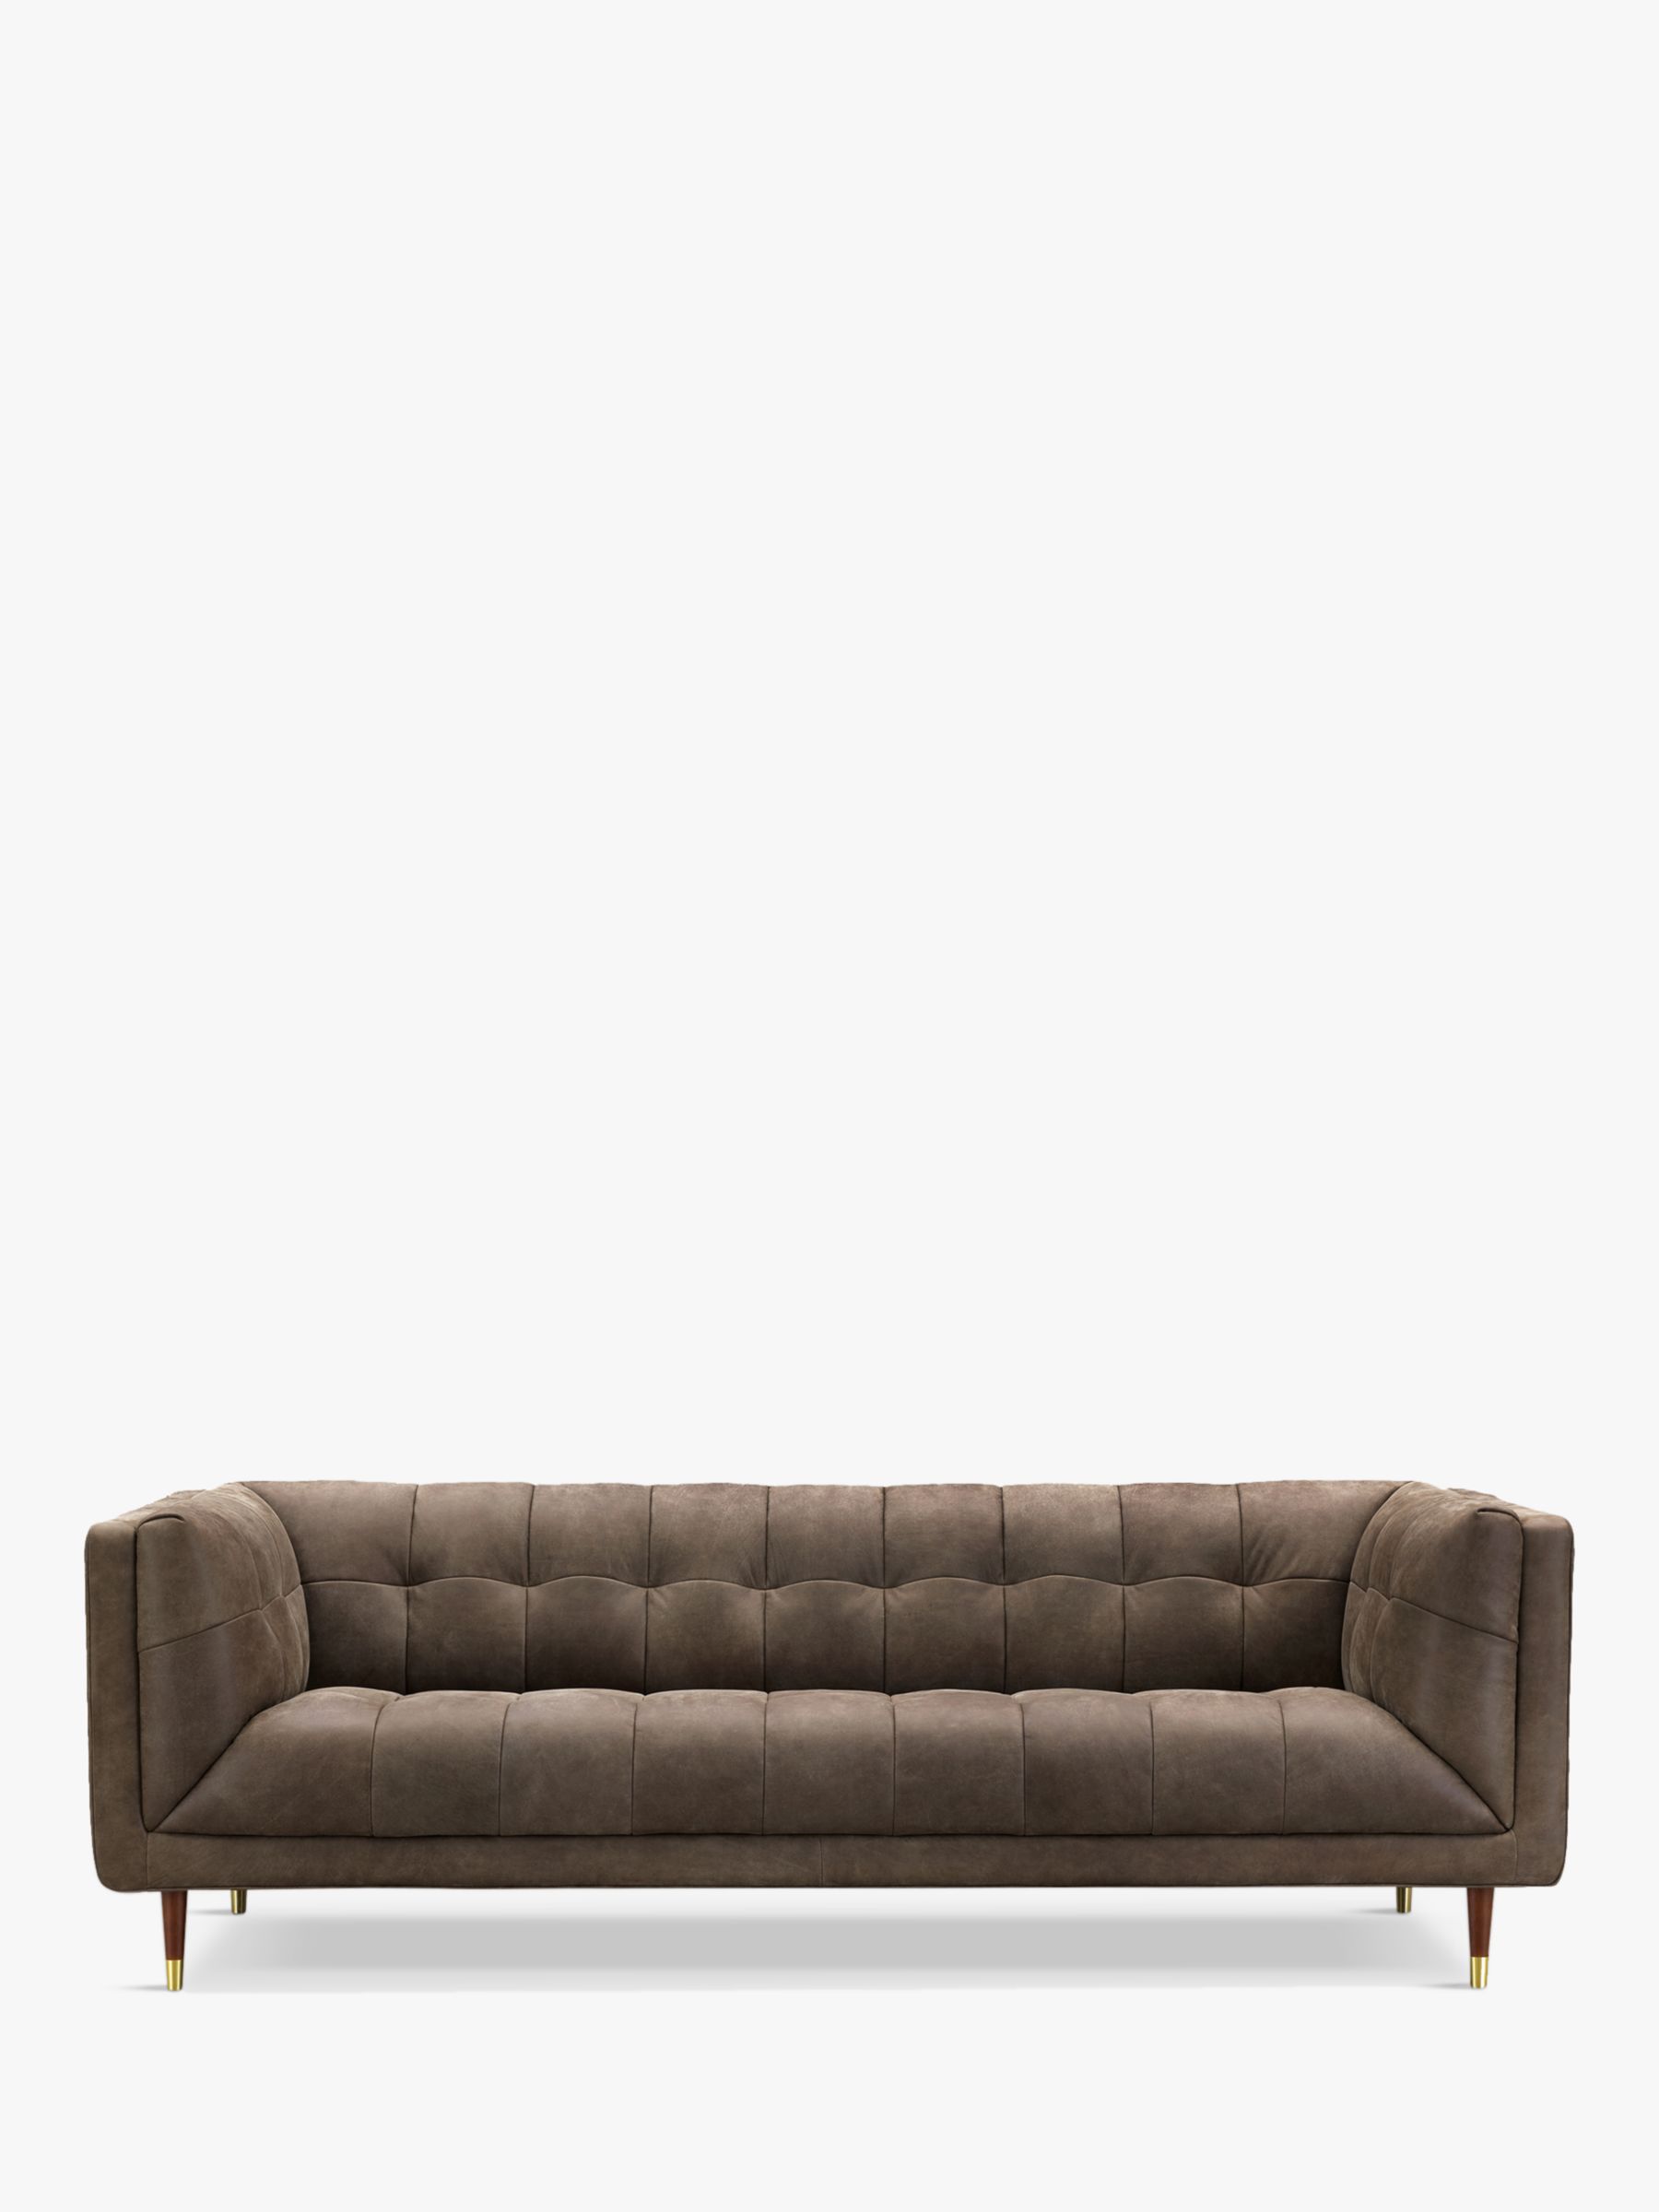 At The Helm Grace Grand 4 Seater Leather Sofa, Dragonstone Leather